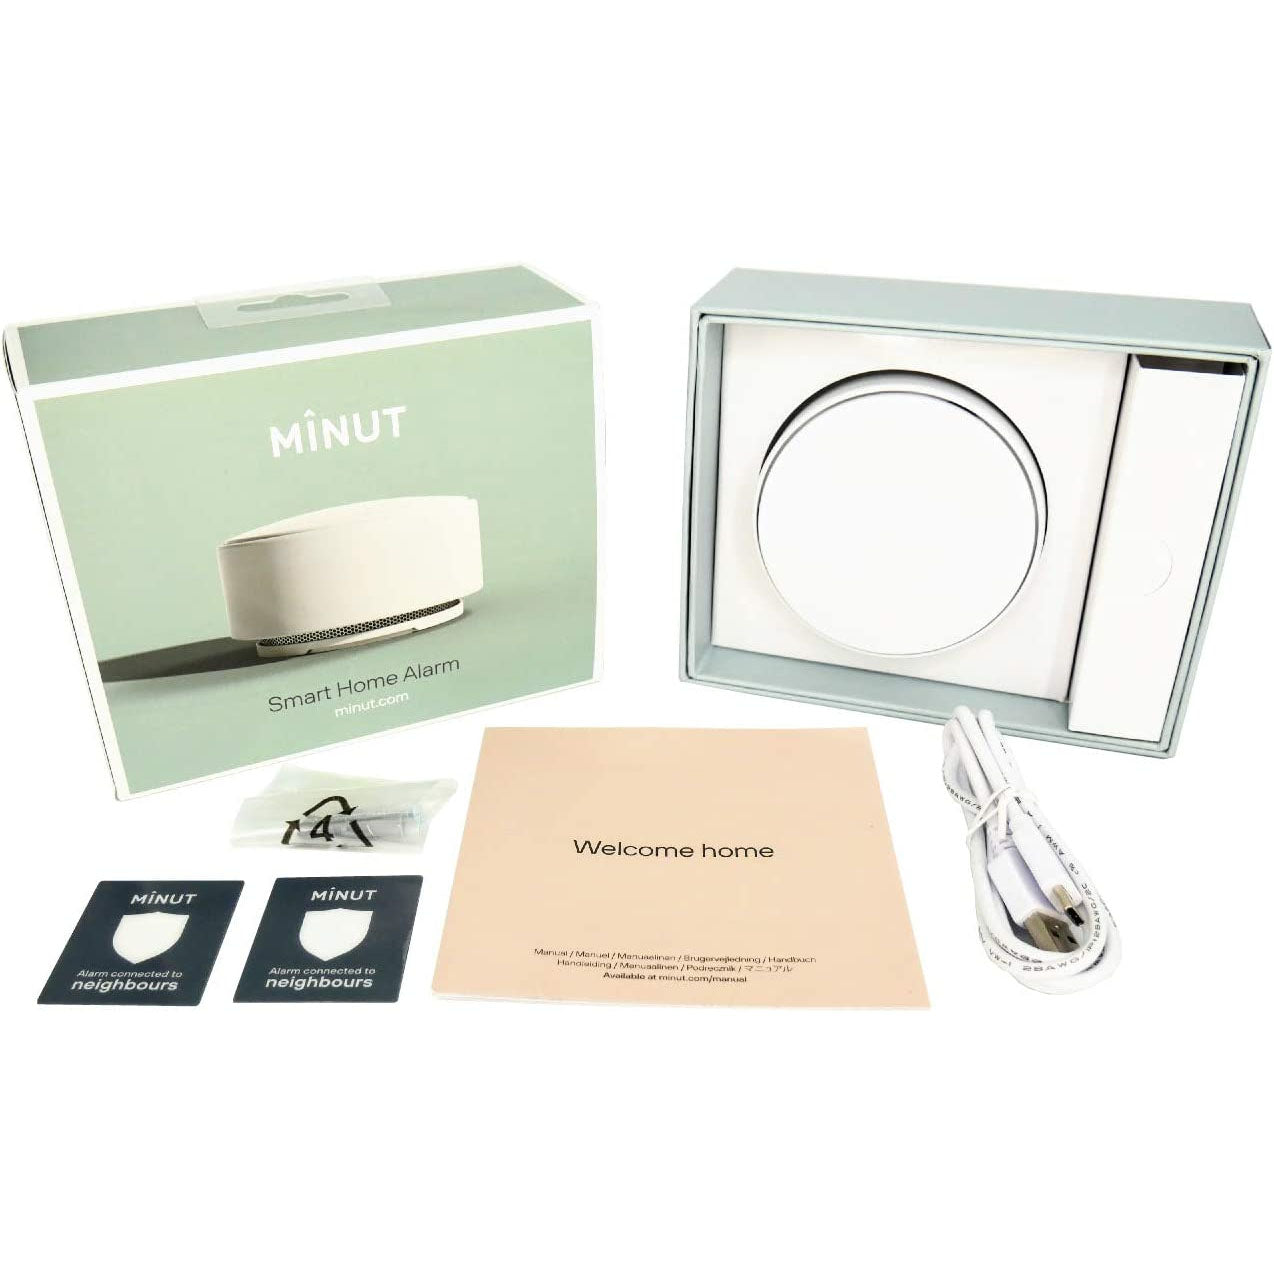 MINUT Smart Home Alarm Sensor with Noise and Temperature Monitoring